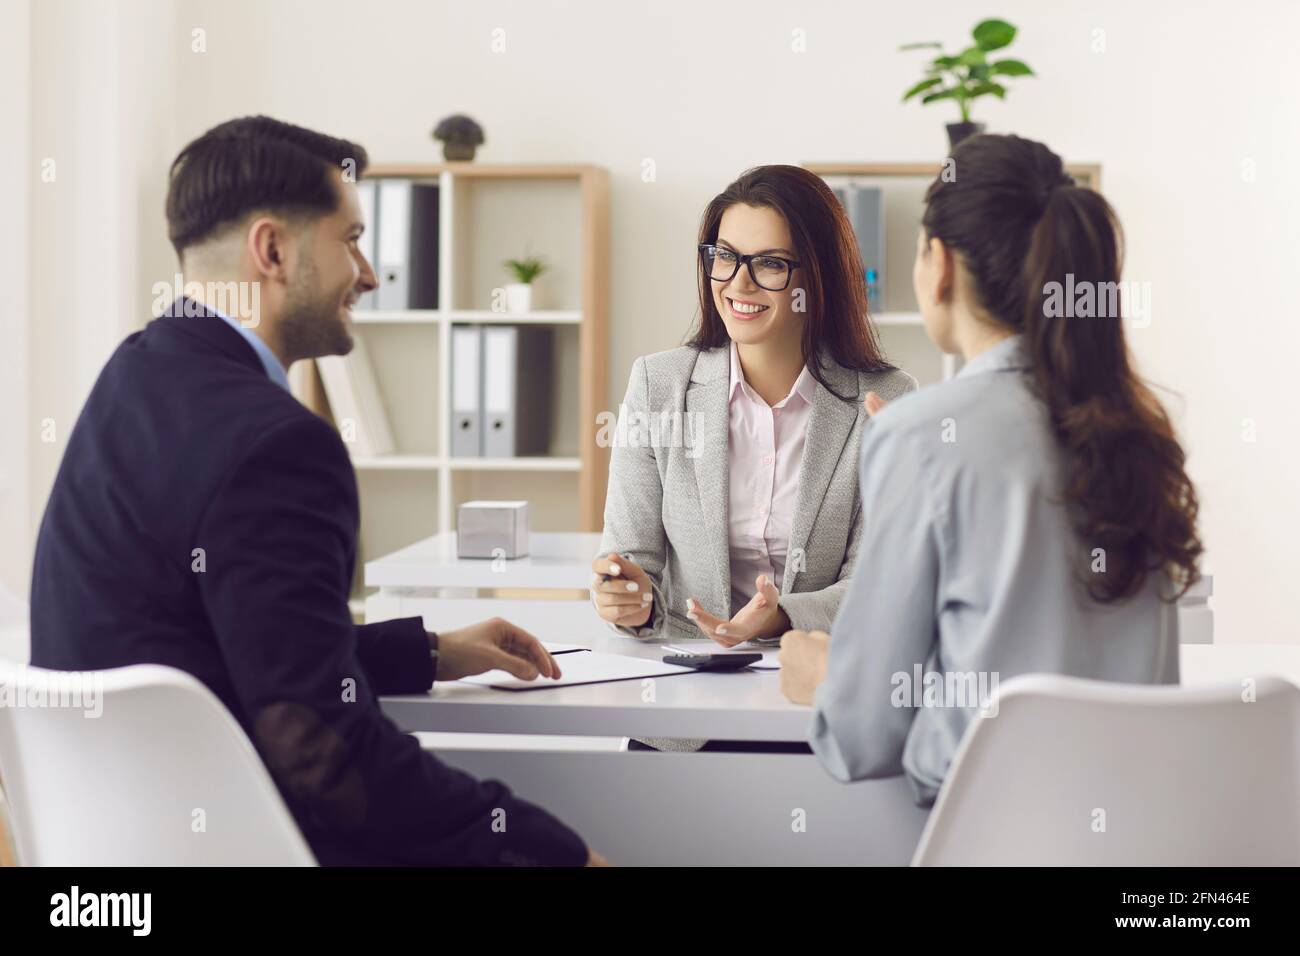 Woman financial advisor giving consultation to family couple about buying house Stock Photo